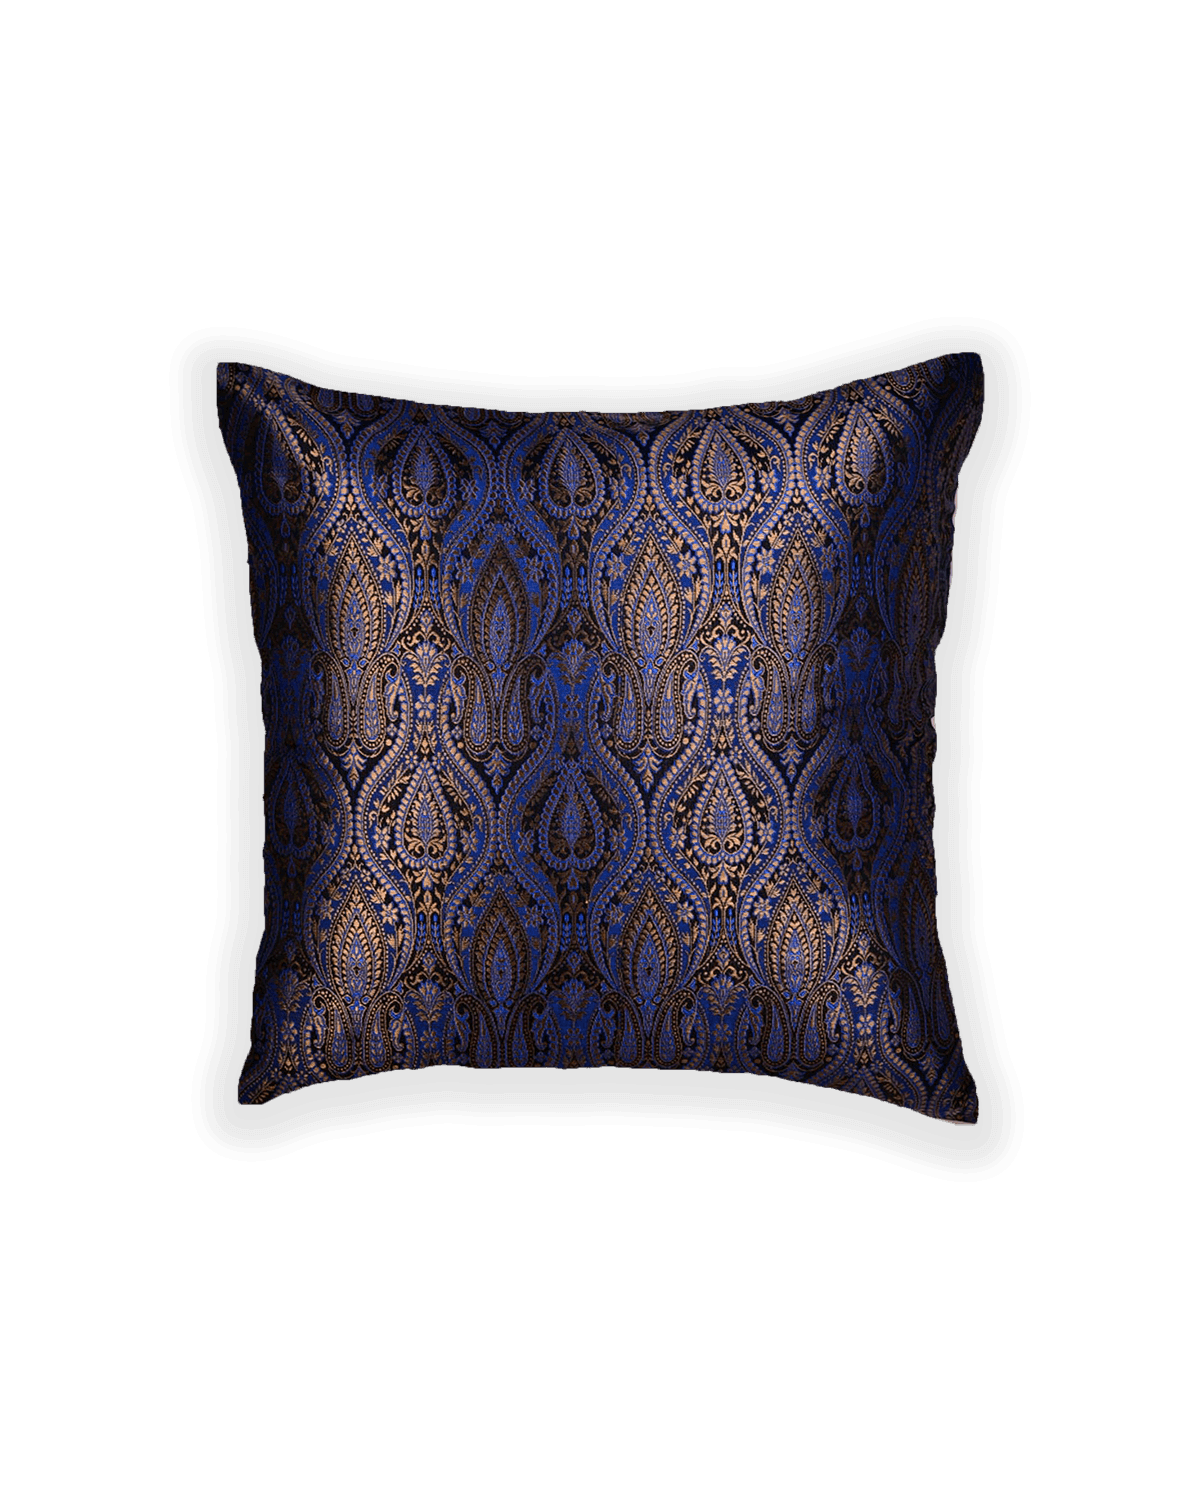 Blue Zari Brocade Woven Poly Silk Cushion Cover with Satin Back 16" - By HolyWeaves, Benares